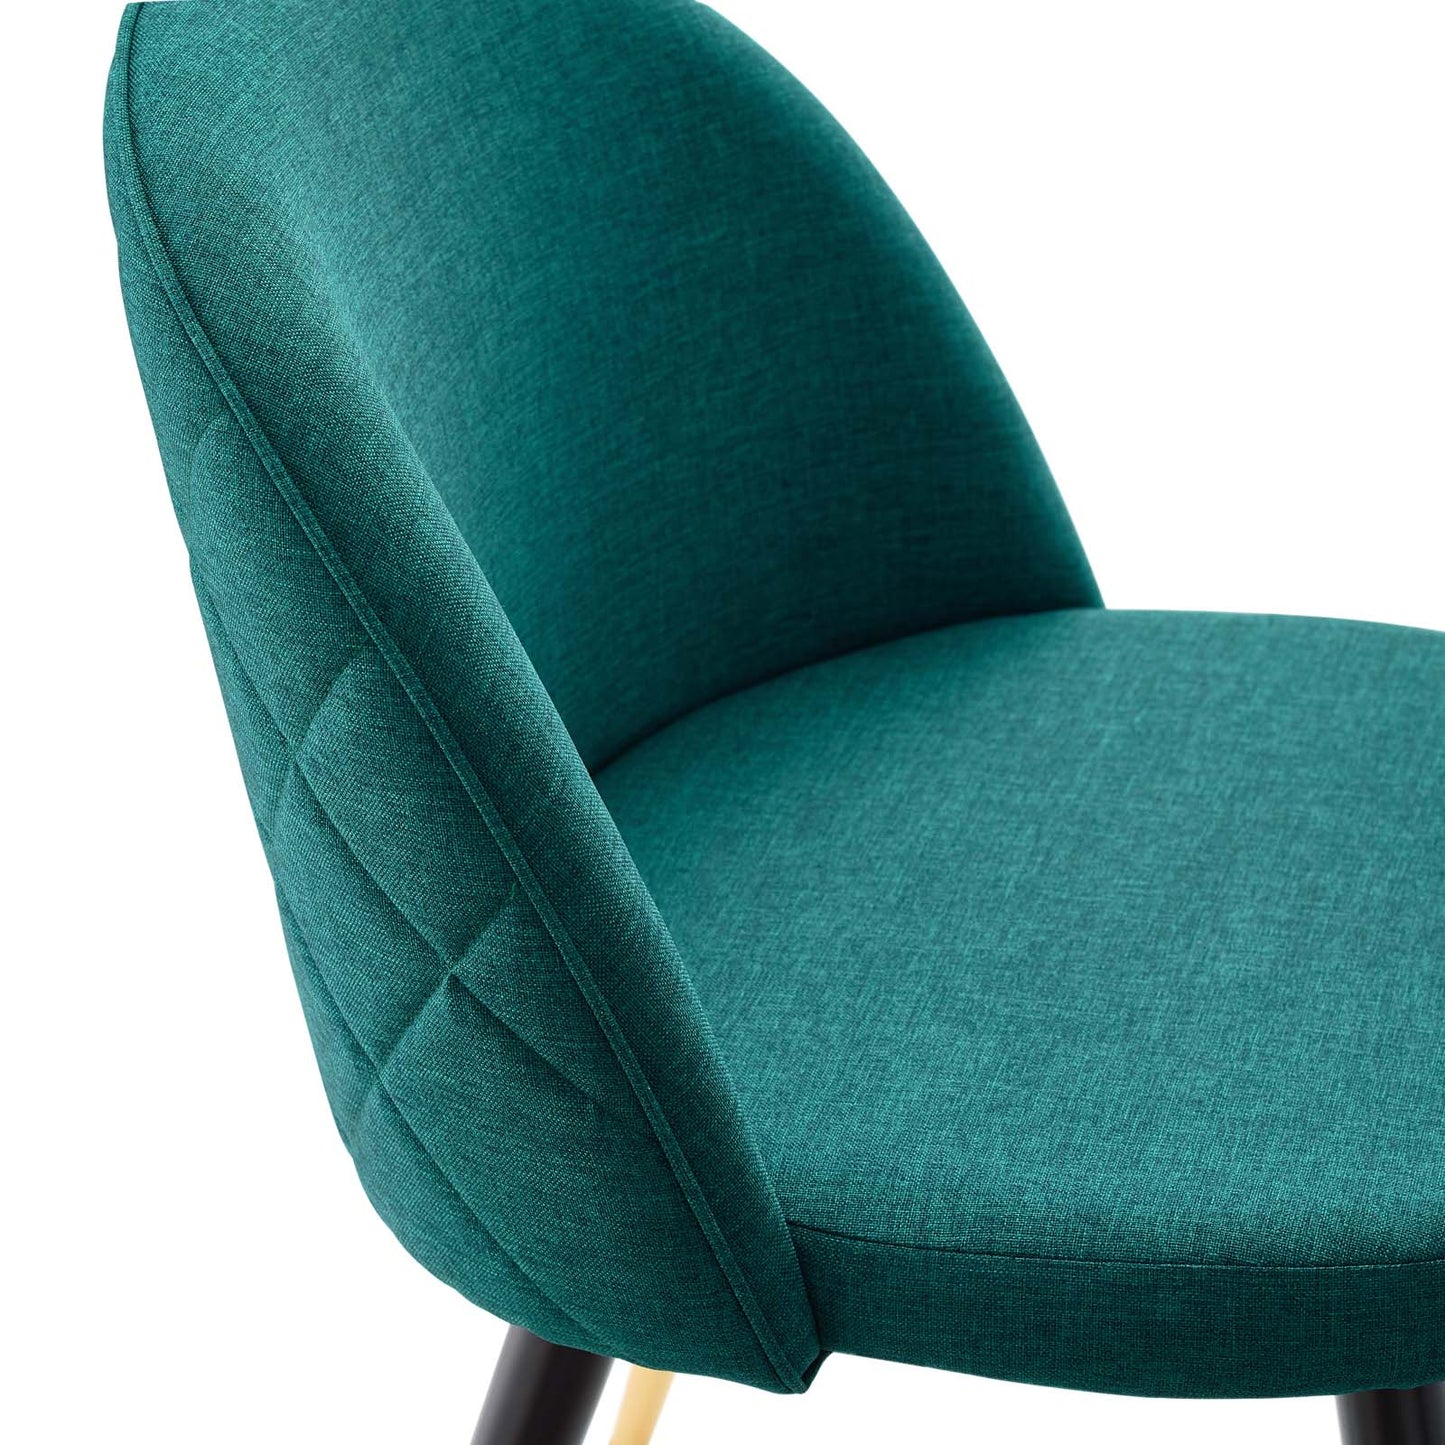 Cordial Dining Chairs - Set of 2 Teal EEI-4524-TEA